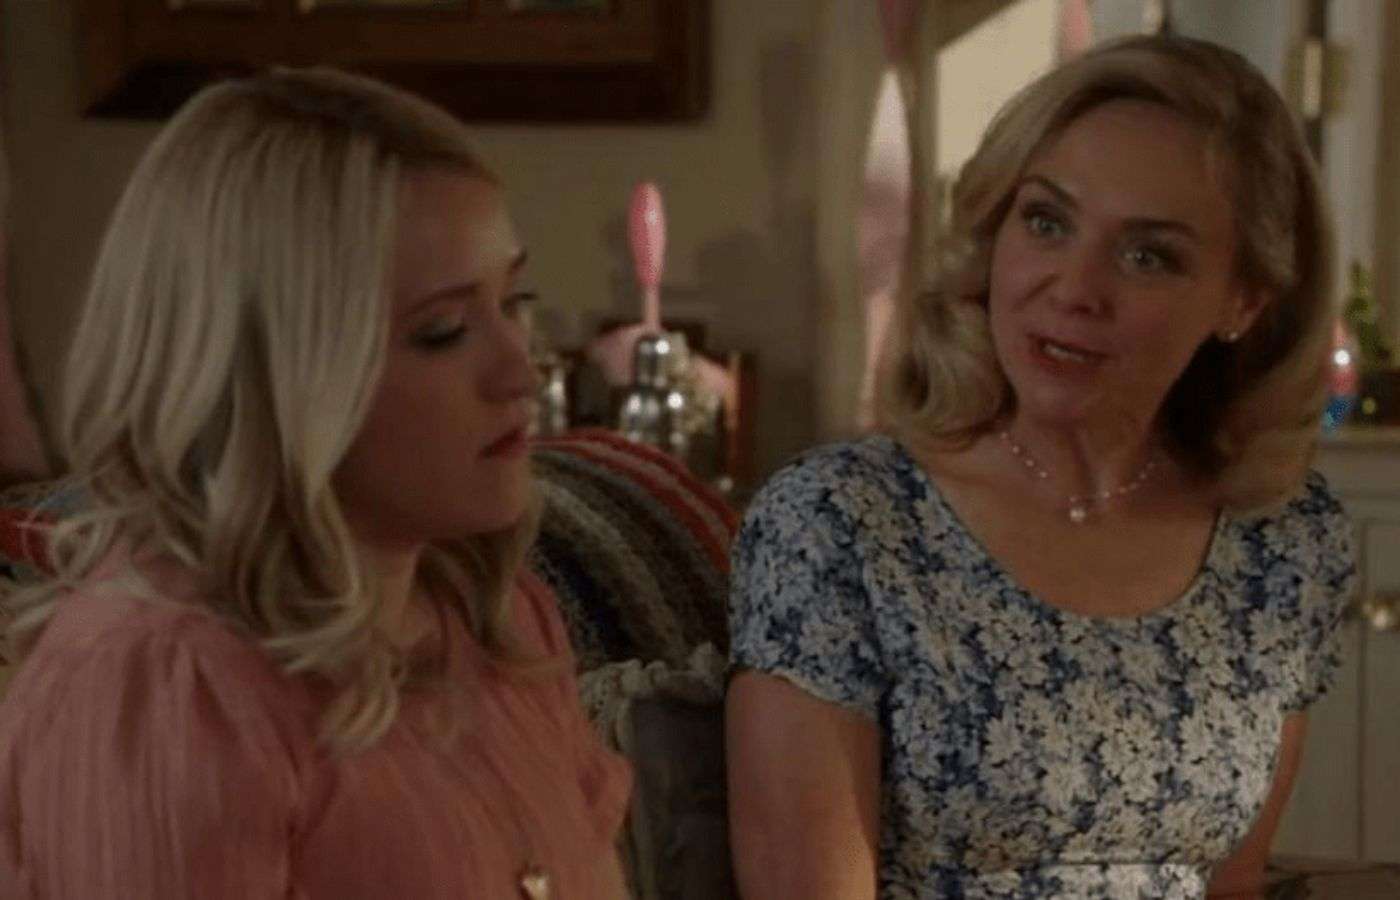 Audrey and Mandy in Young Sheldon